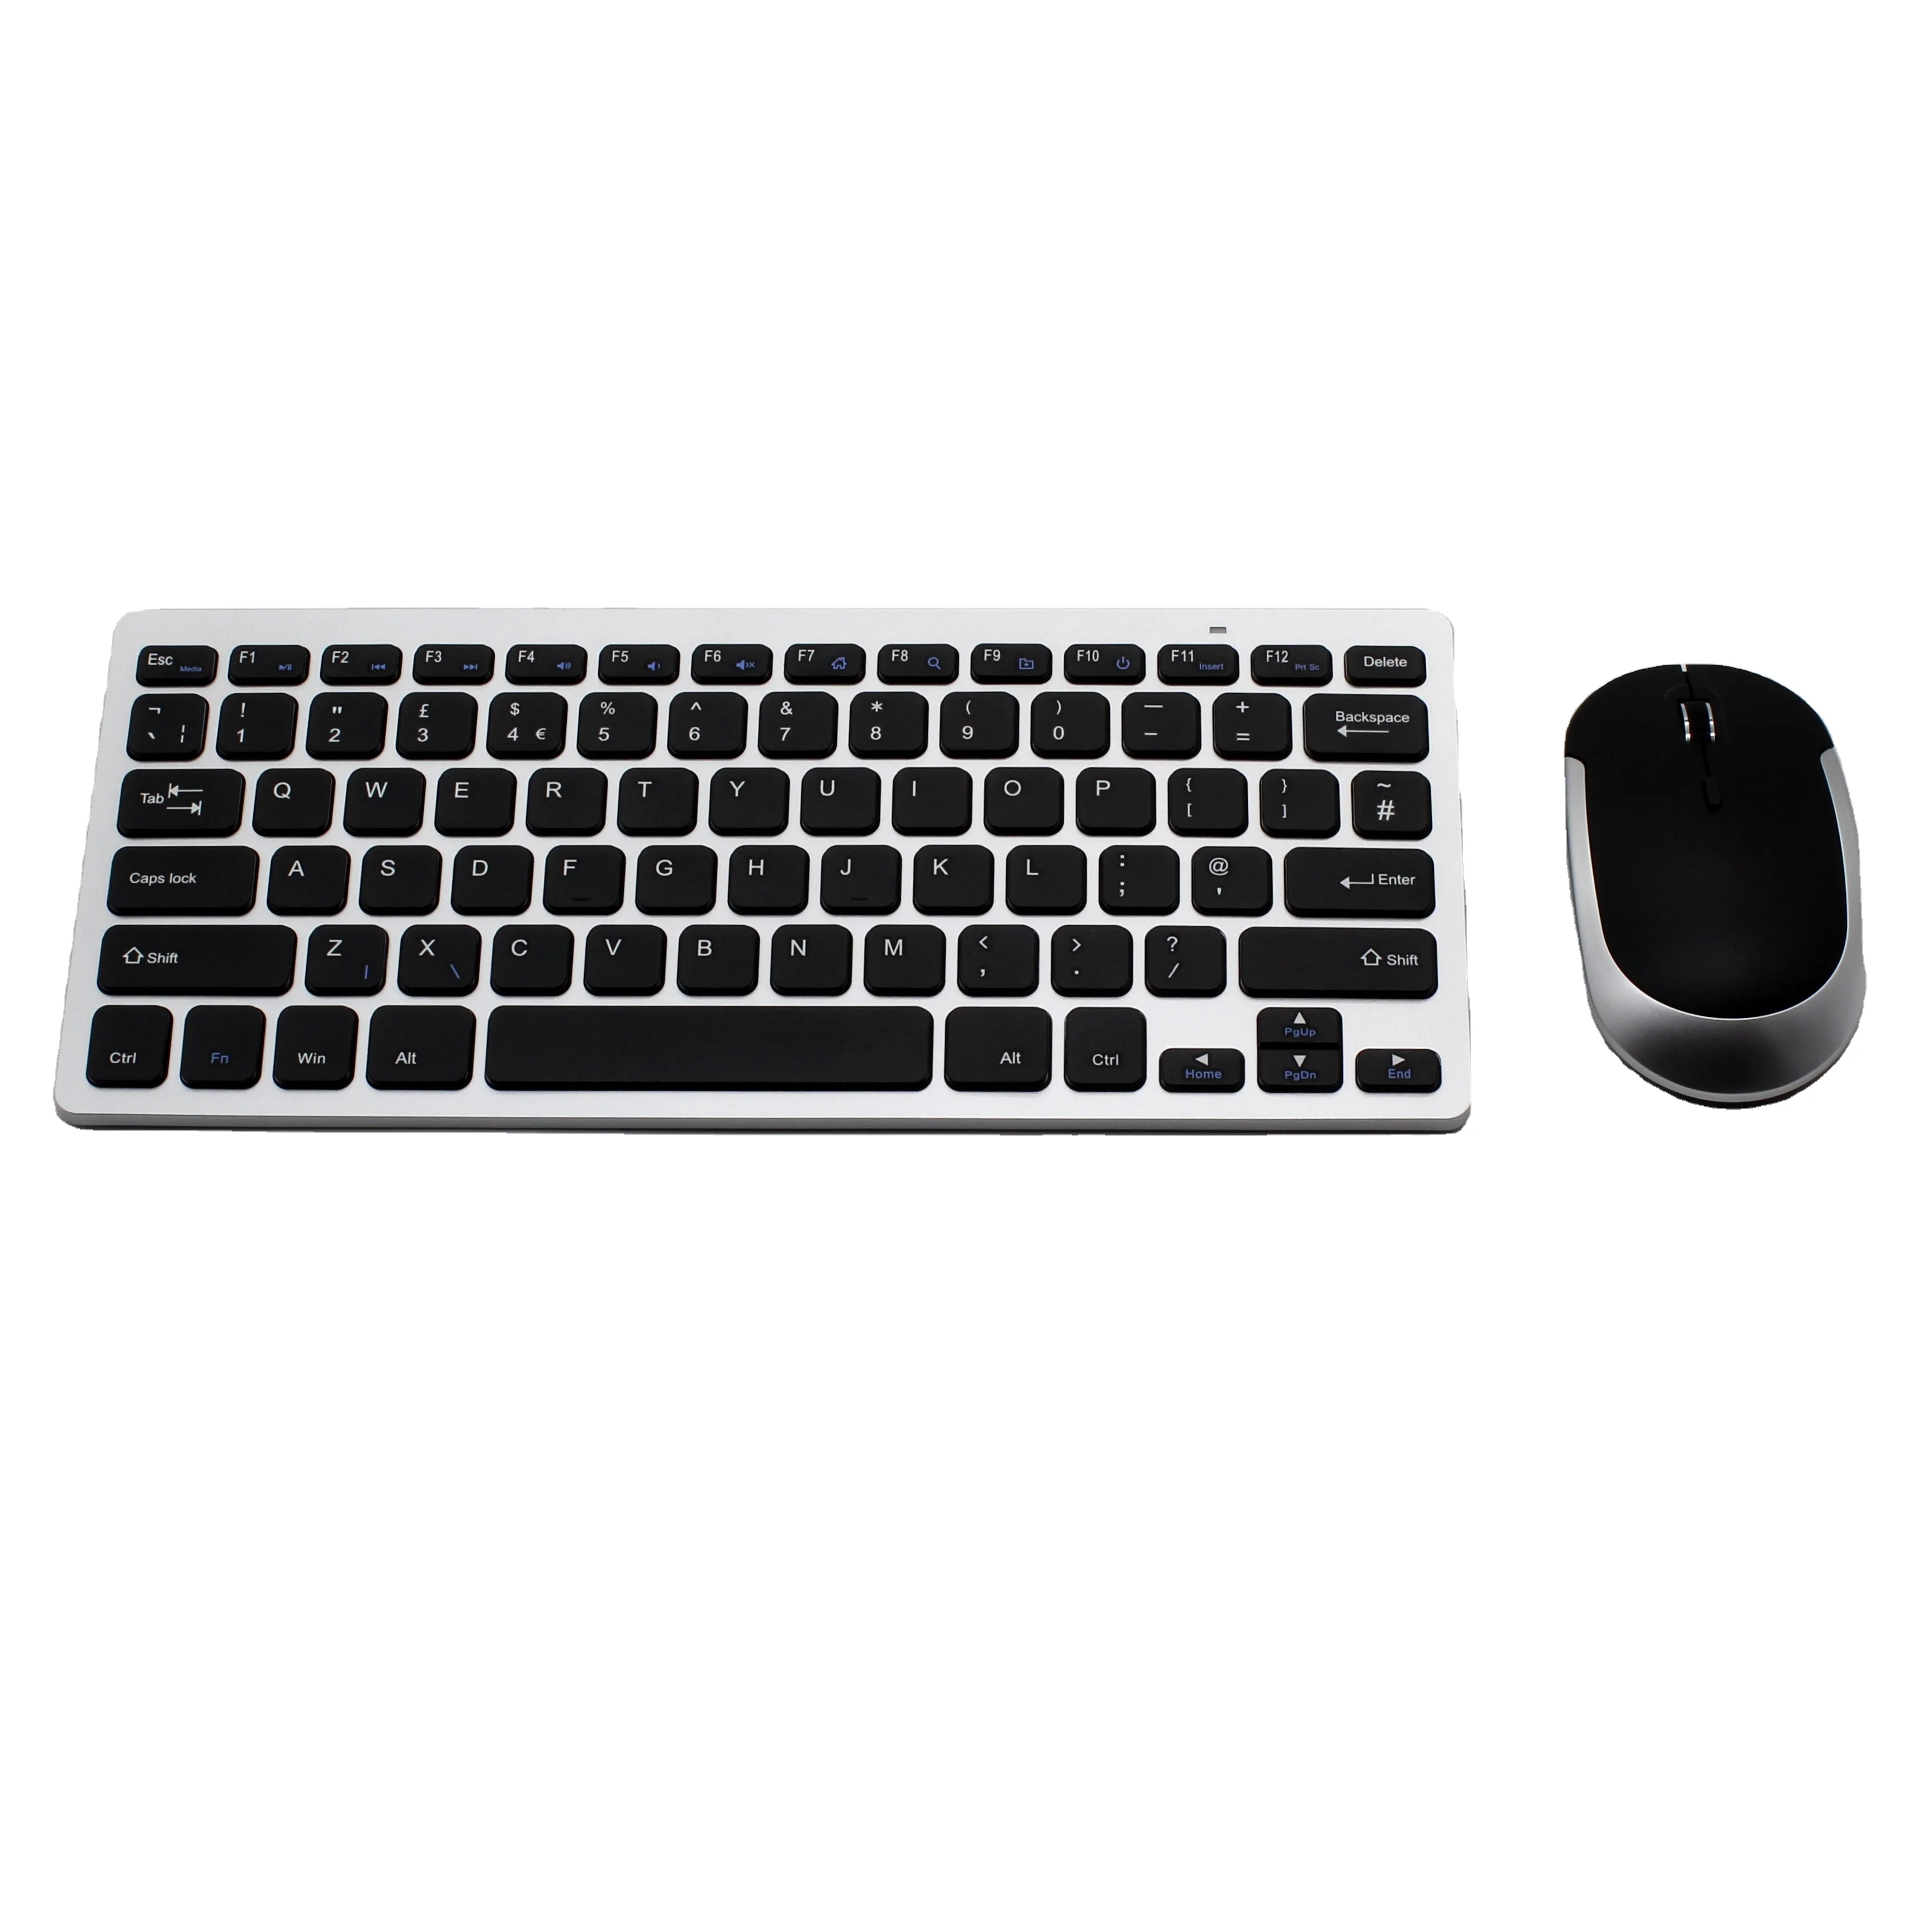 

Professional universal 2.4G mini wireless computer keyboard and mouse combination suitable for mobile phones and tablets